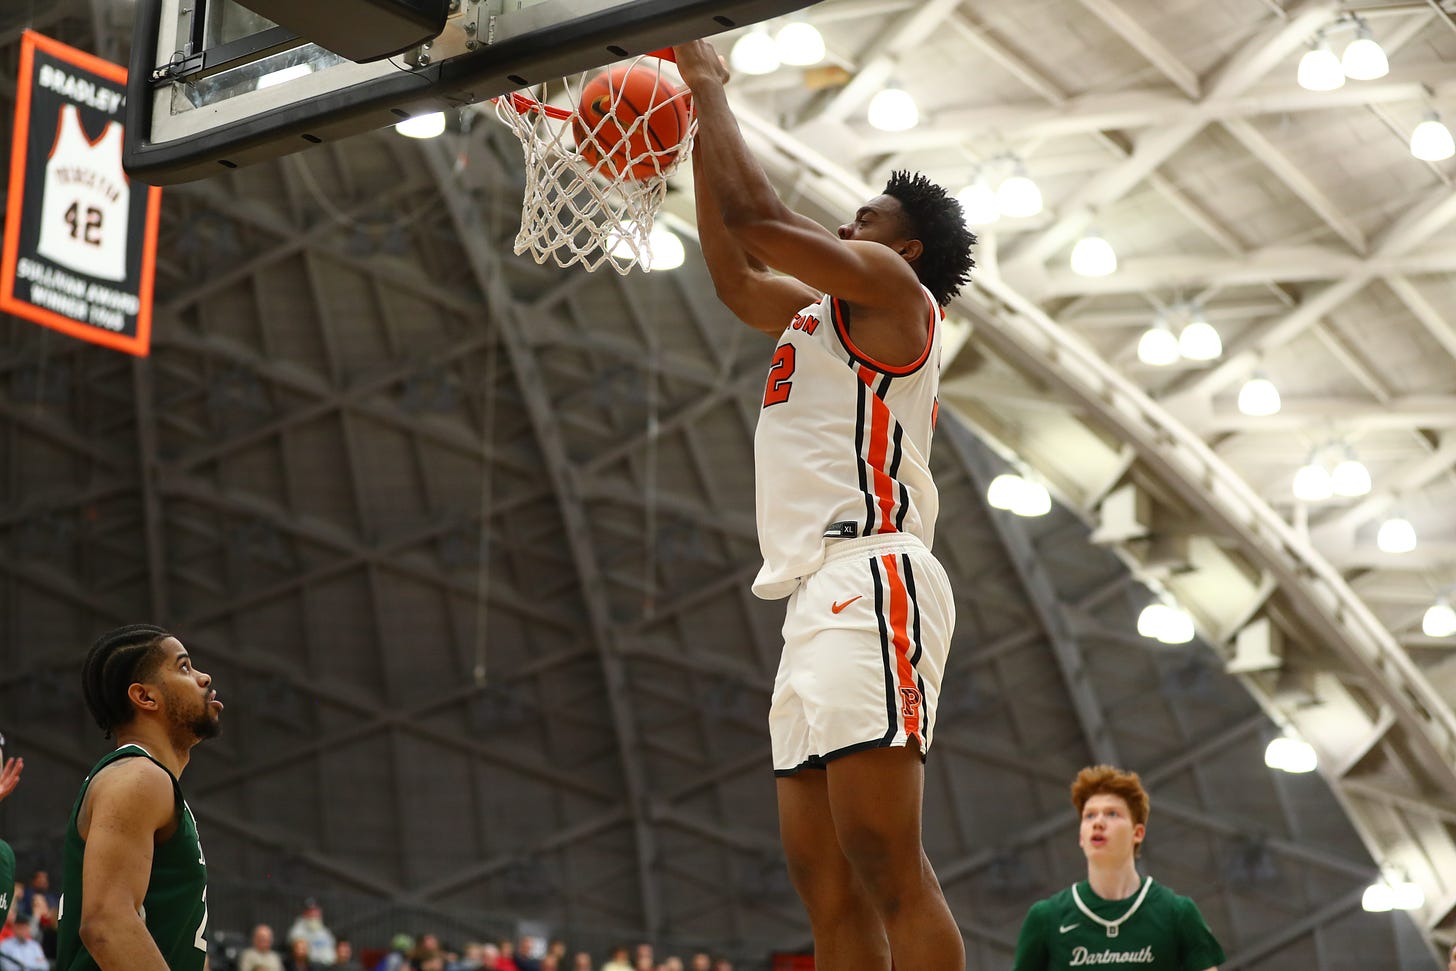 Keeshawn Kellman dunks during a home game against Dartmouth on Jan. 21, 2023. (Photo by Larry Levanti / courtesy of Princeton athletics)